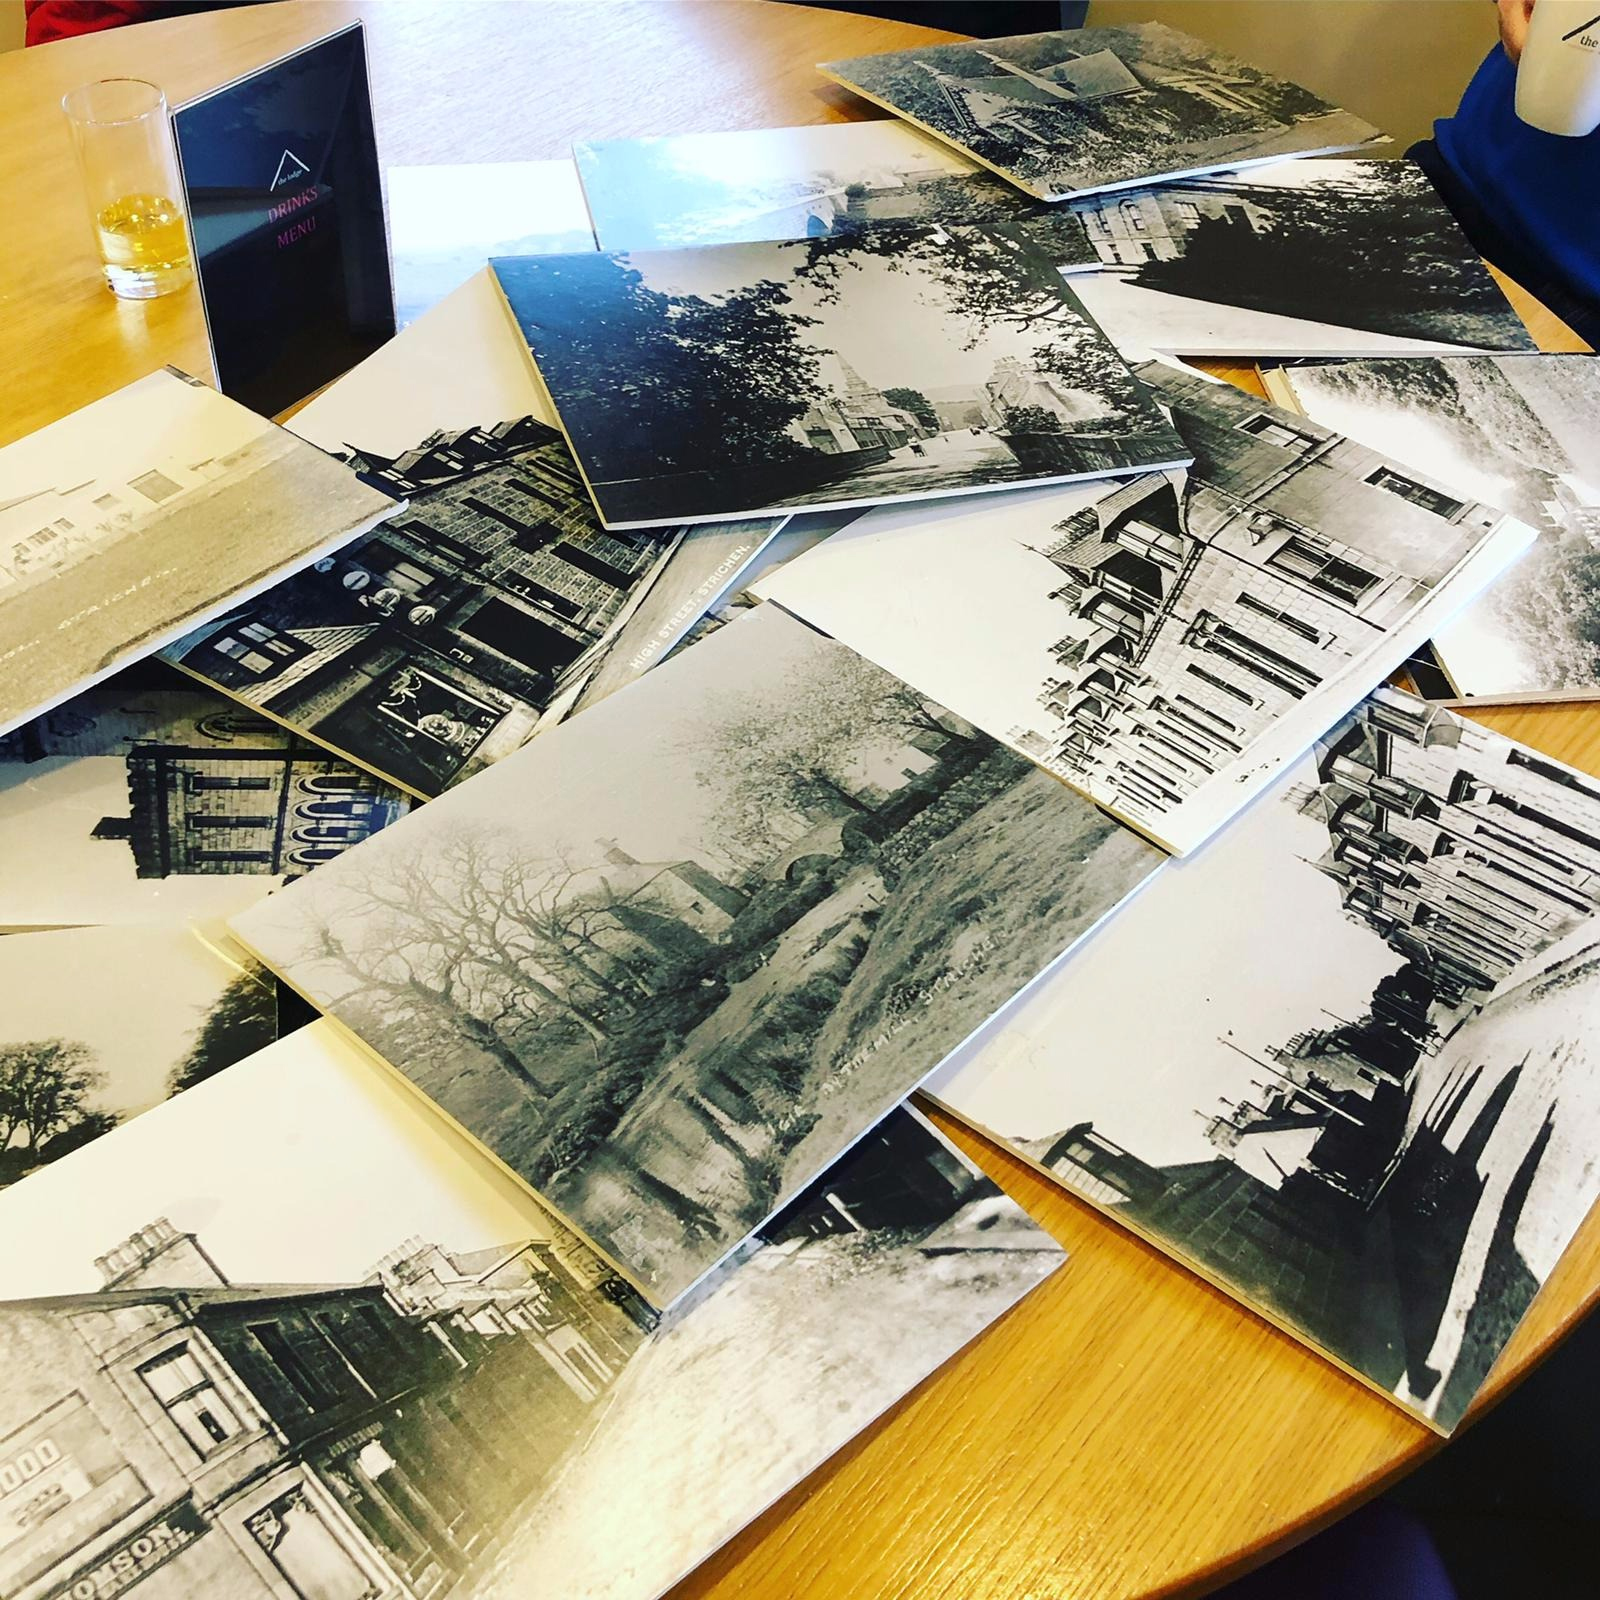 The photographs which used to line walls of the Lodge have been damaged beyond repair